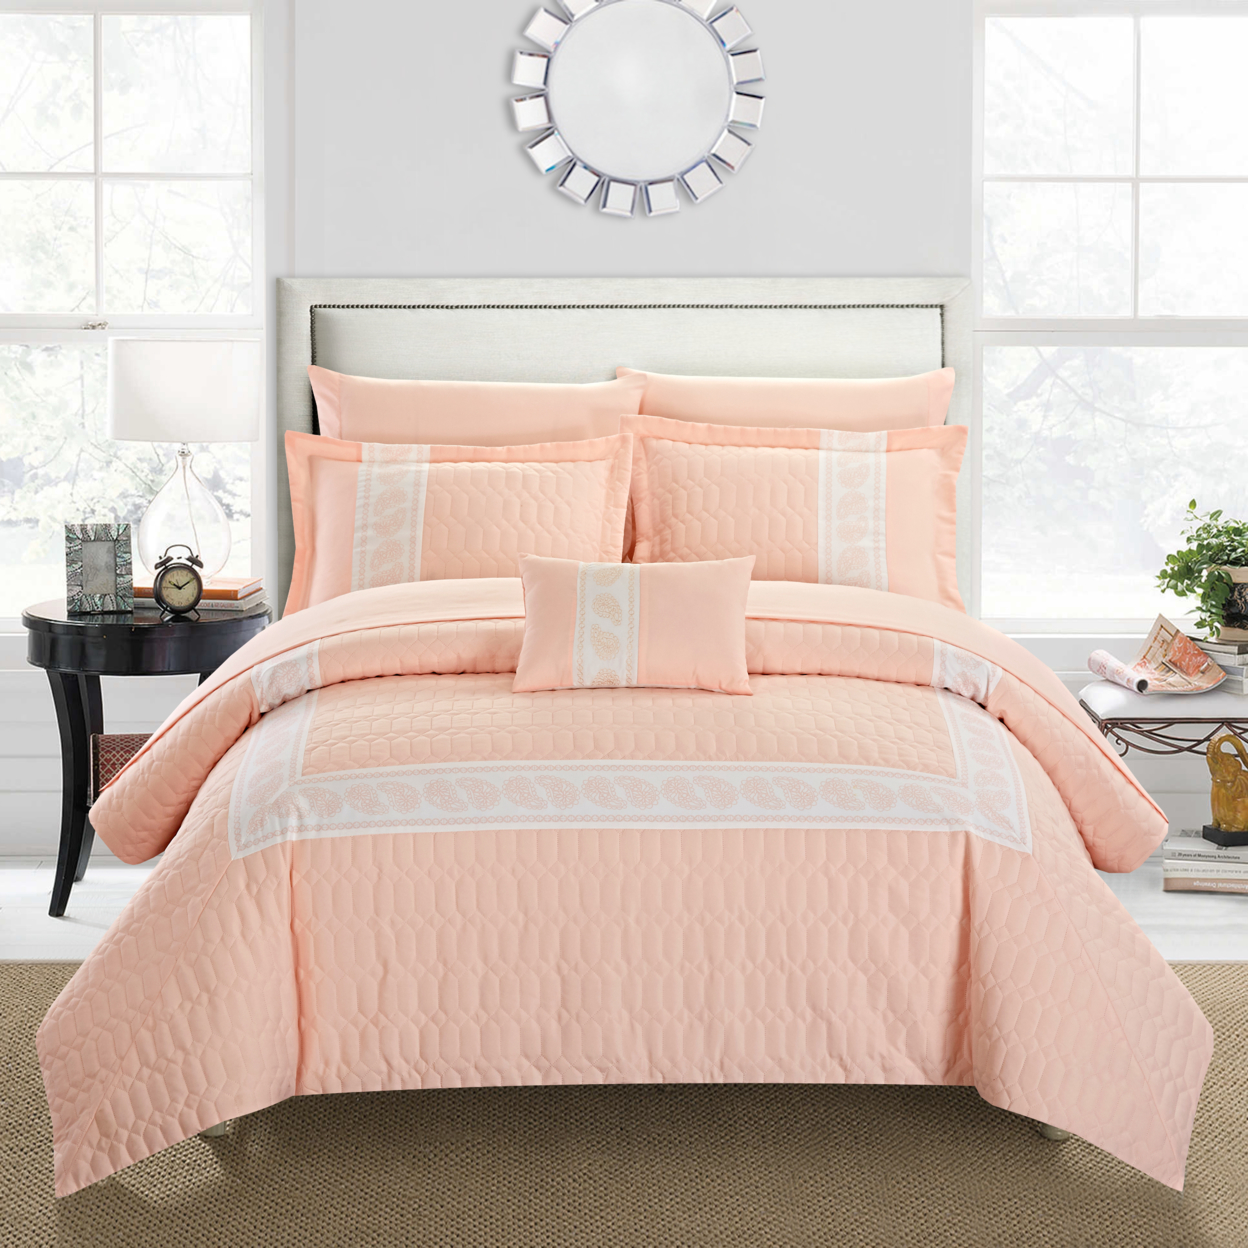 Keegan 8 Or 6 Piece Comforter Set Hotel Collection Hexagon Embossed Paisley Print Border Design Bed In A Bag - Blush, Twin